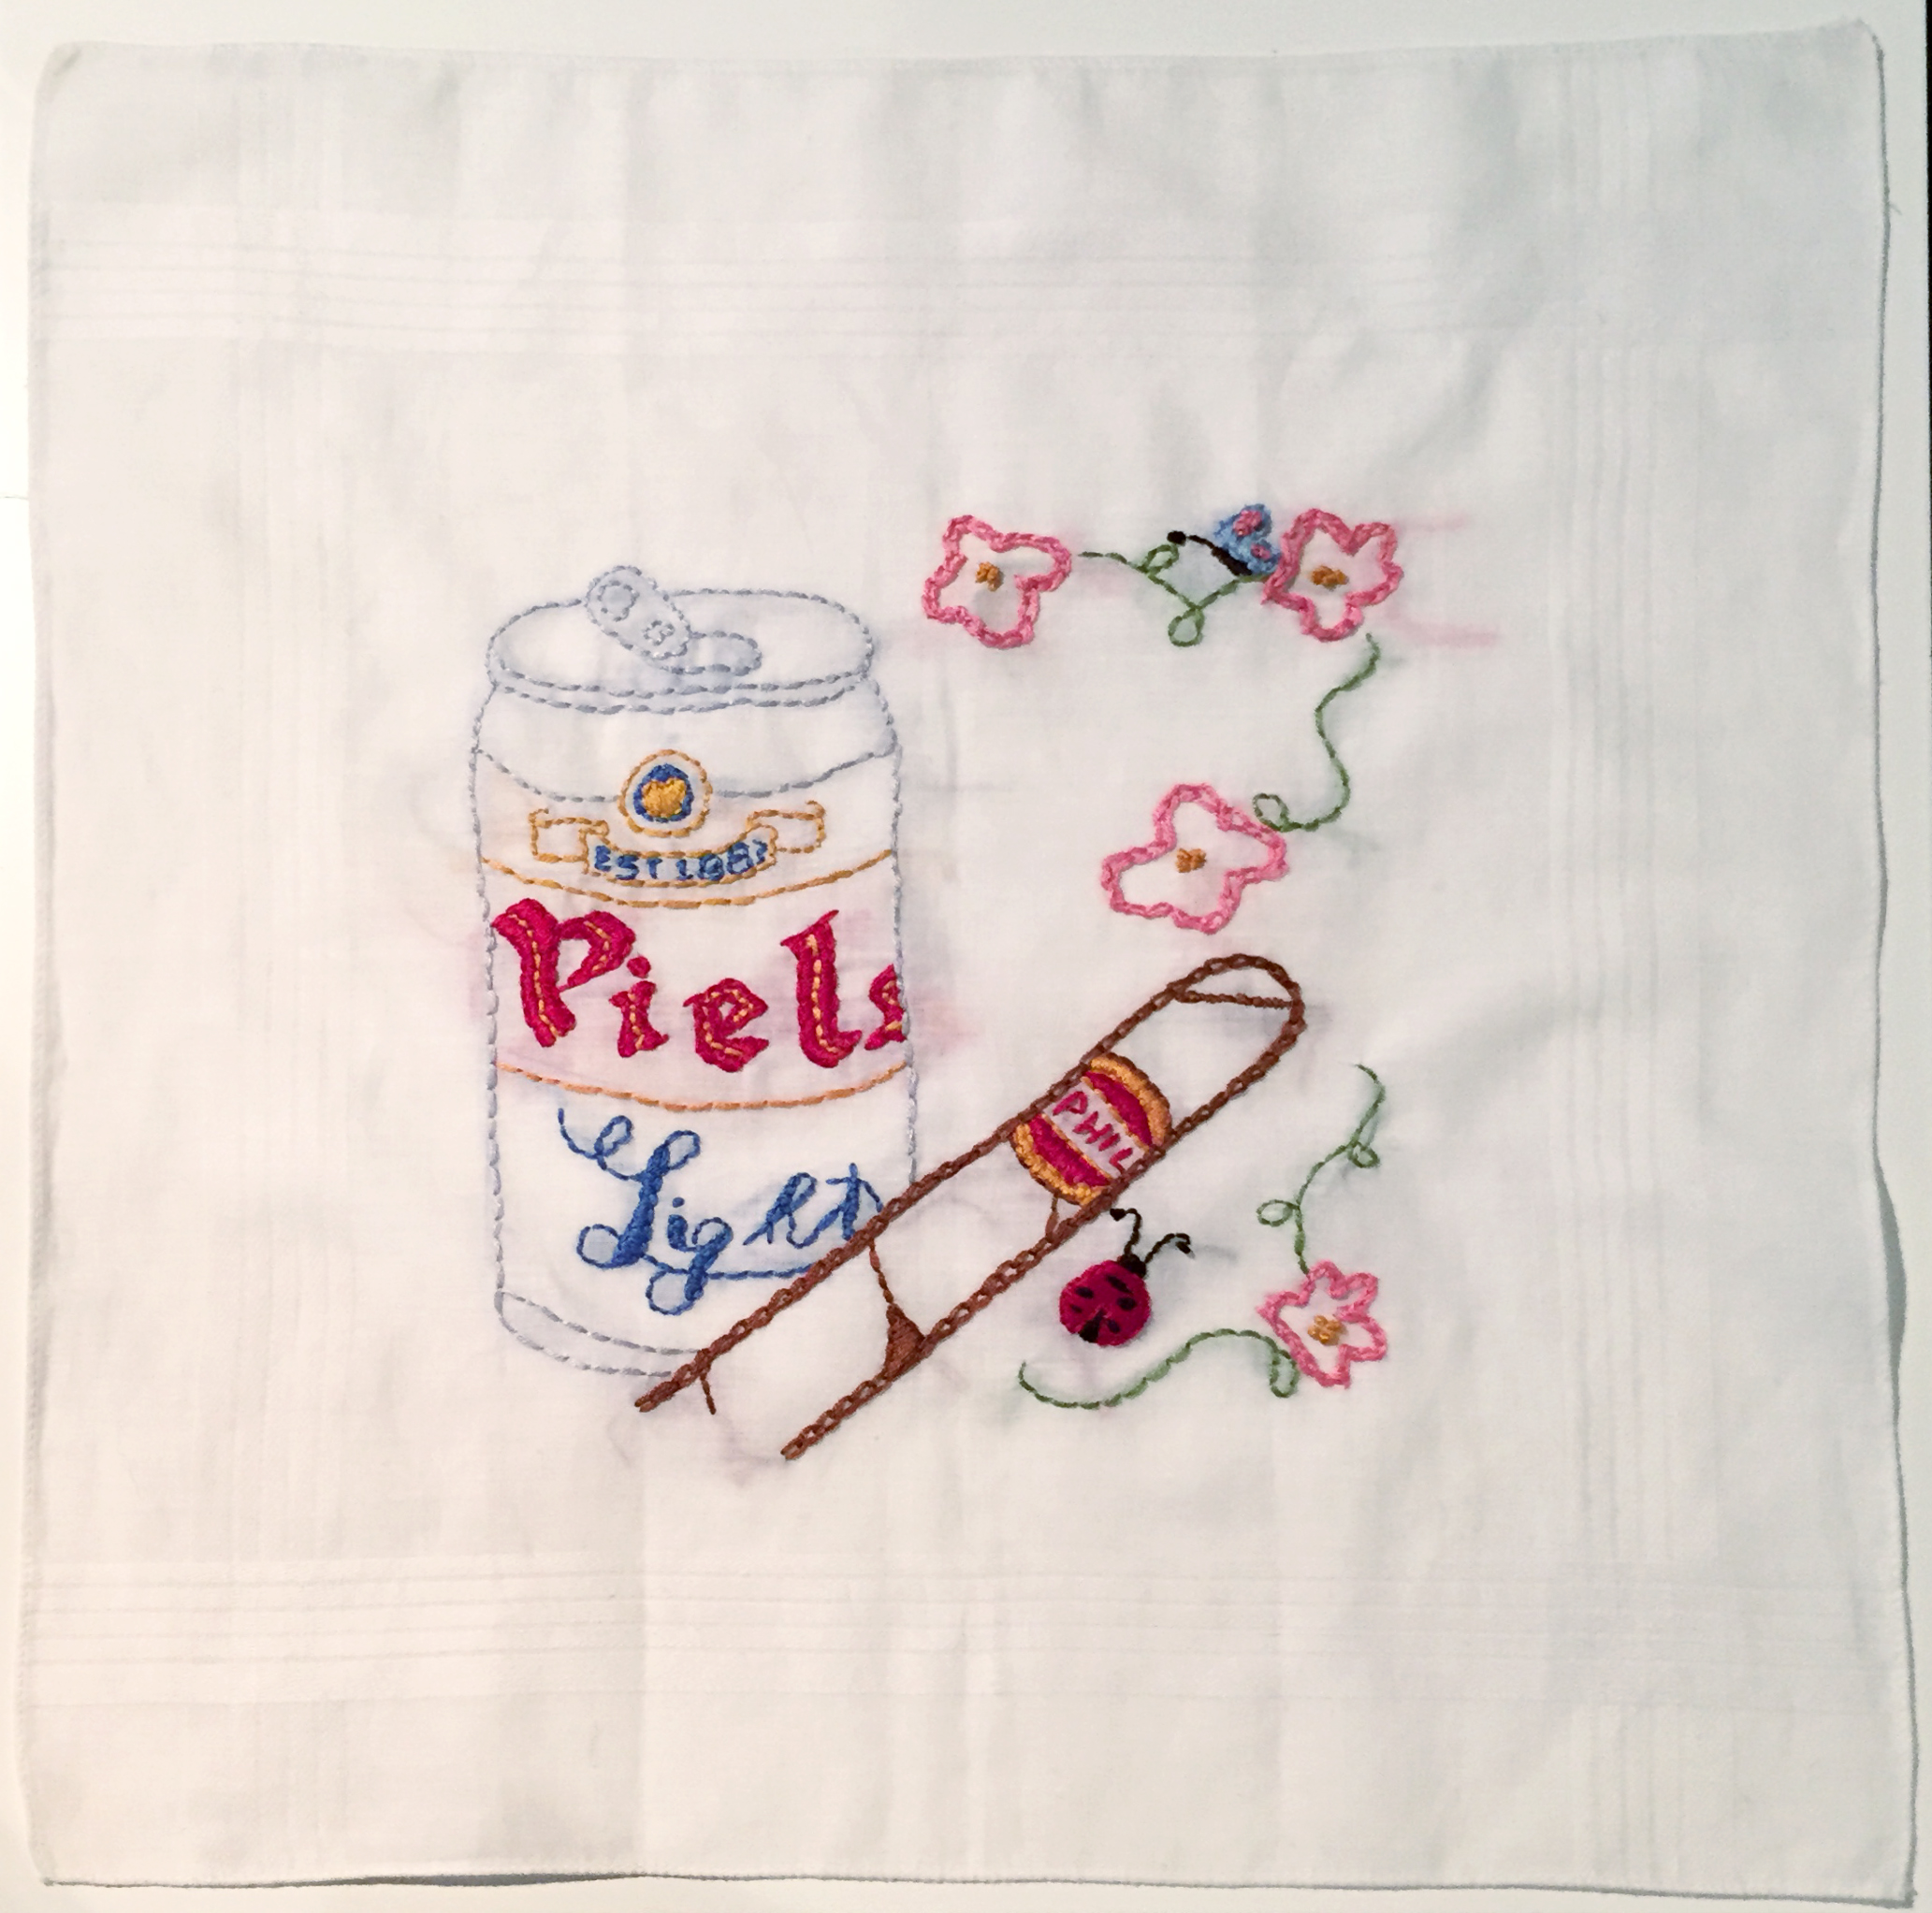  One of her other talents...embroidery on a handkerchief made when she was in high school.&nbsp; 